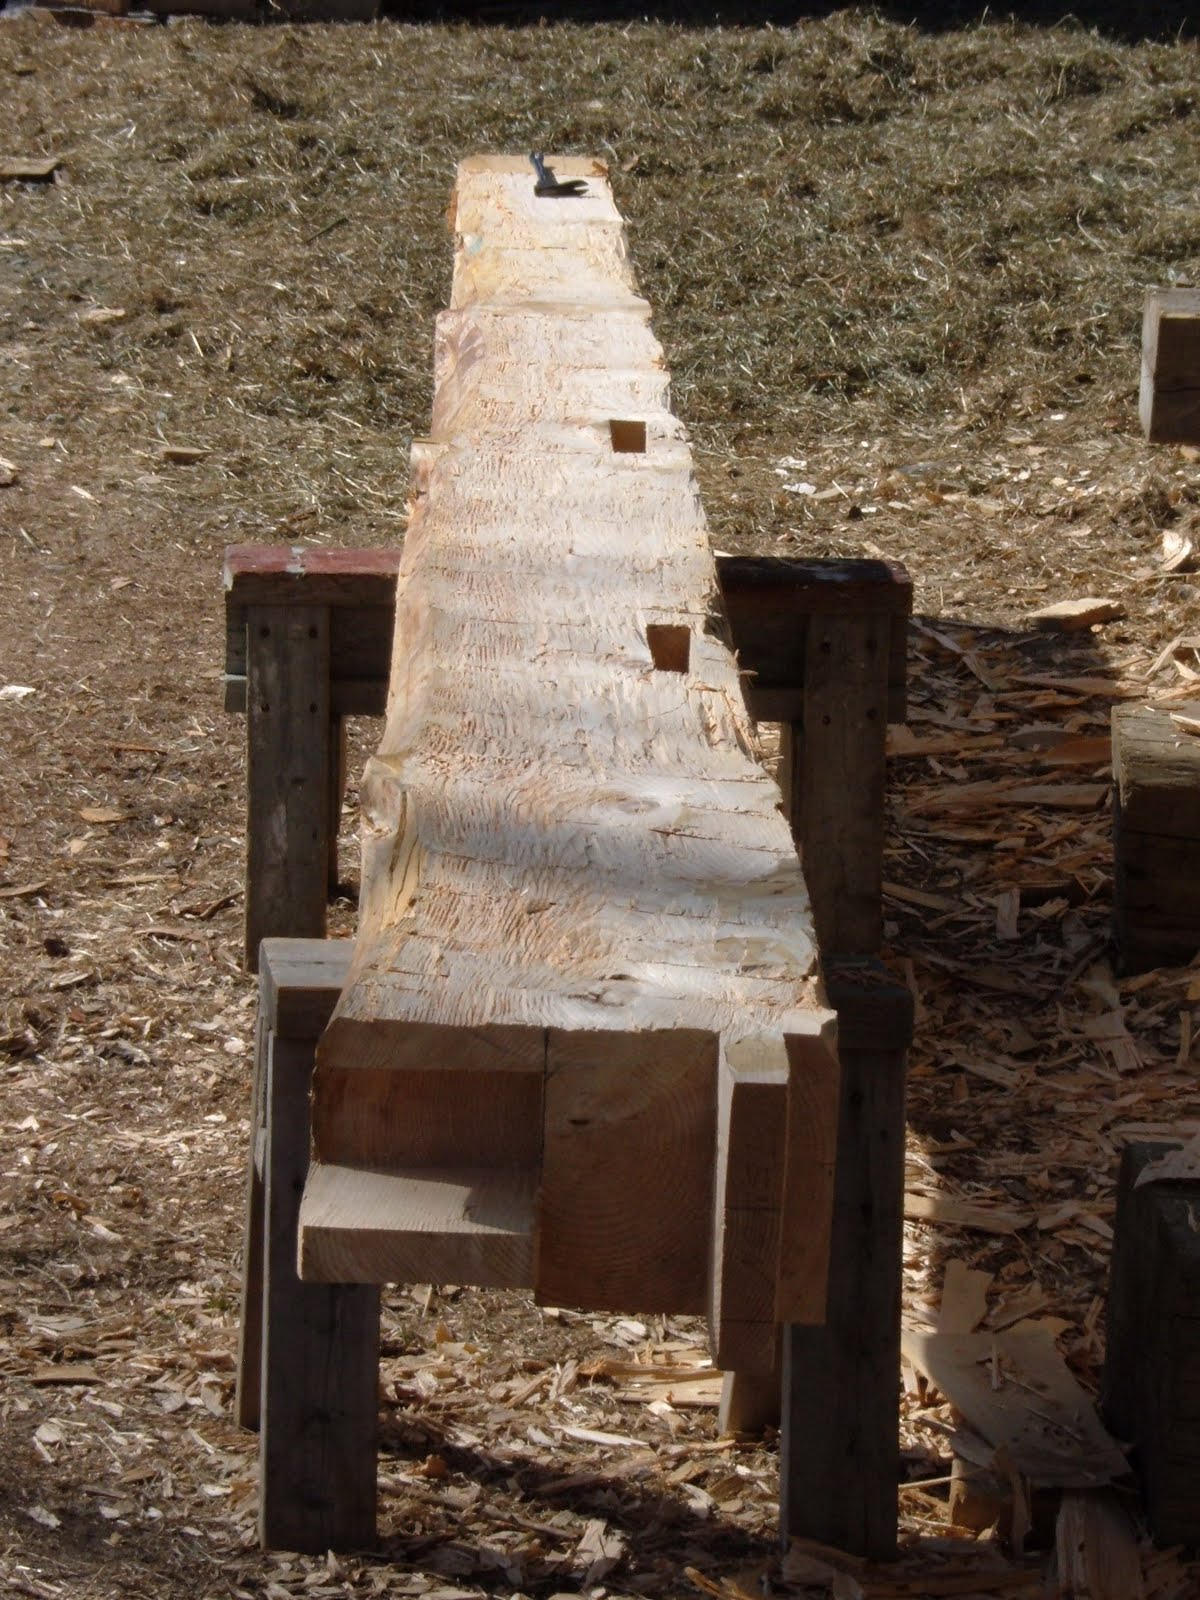 Hewn hemlock post replicating the orignal joinery for the english tying joint.